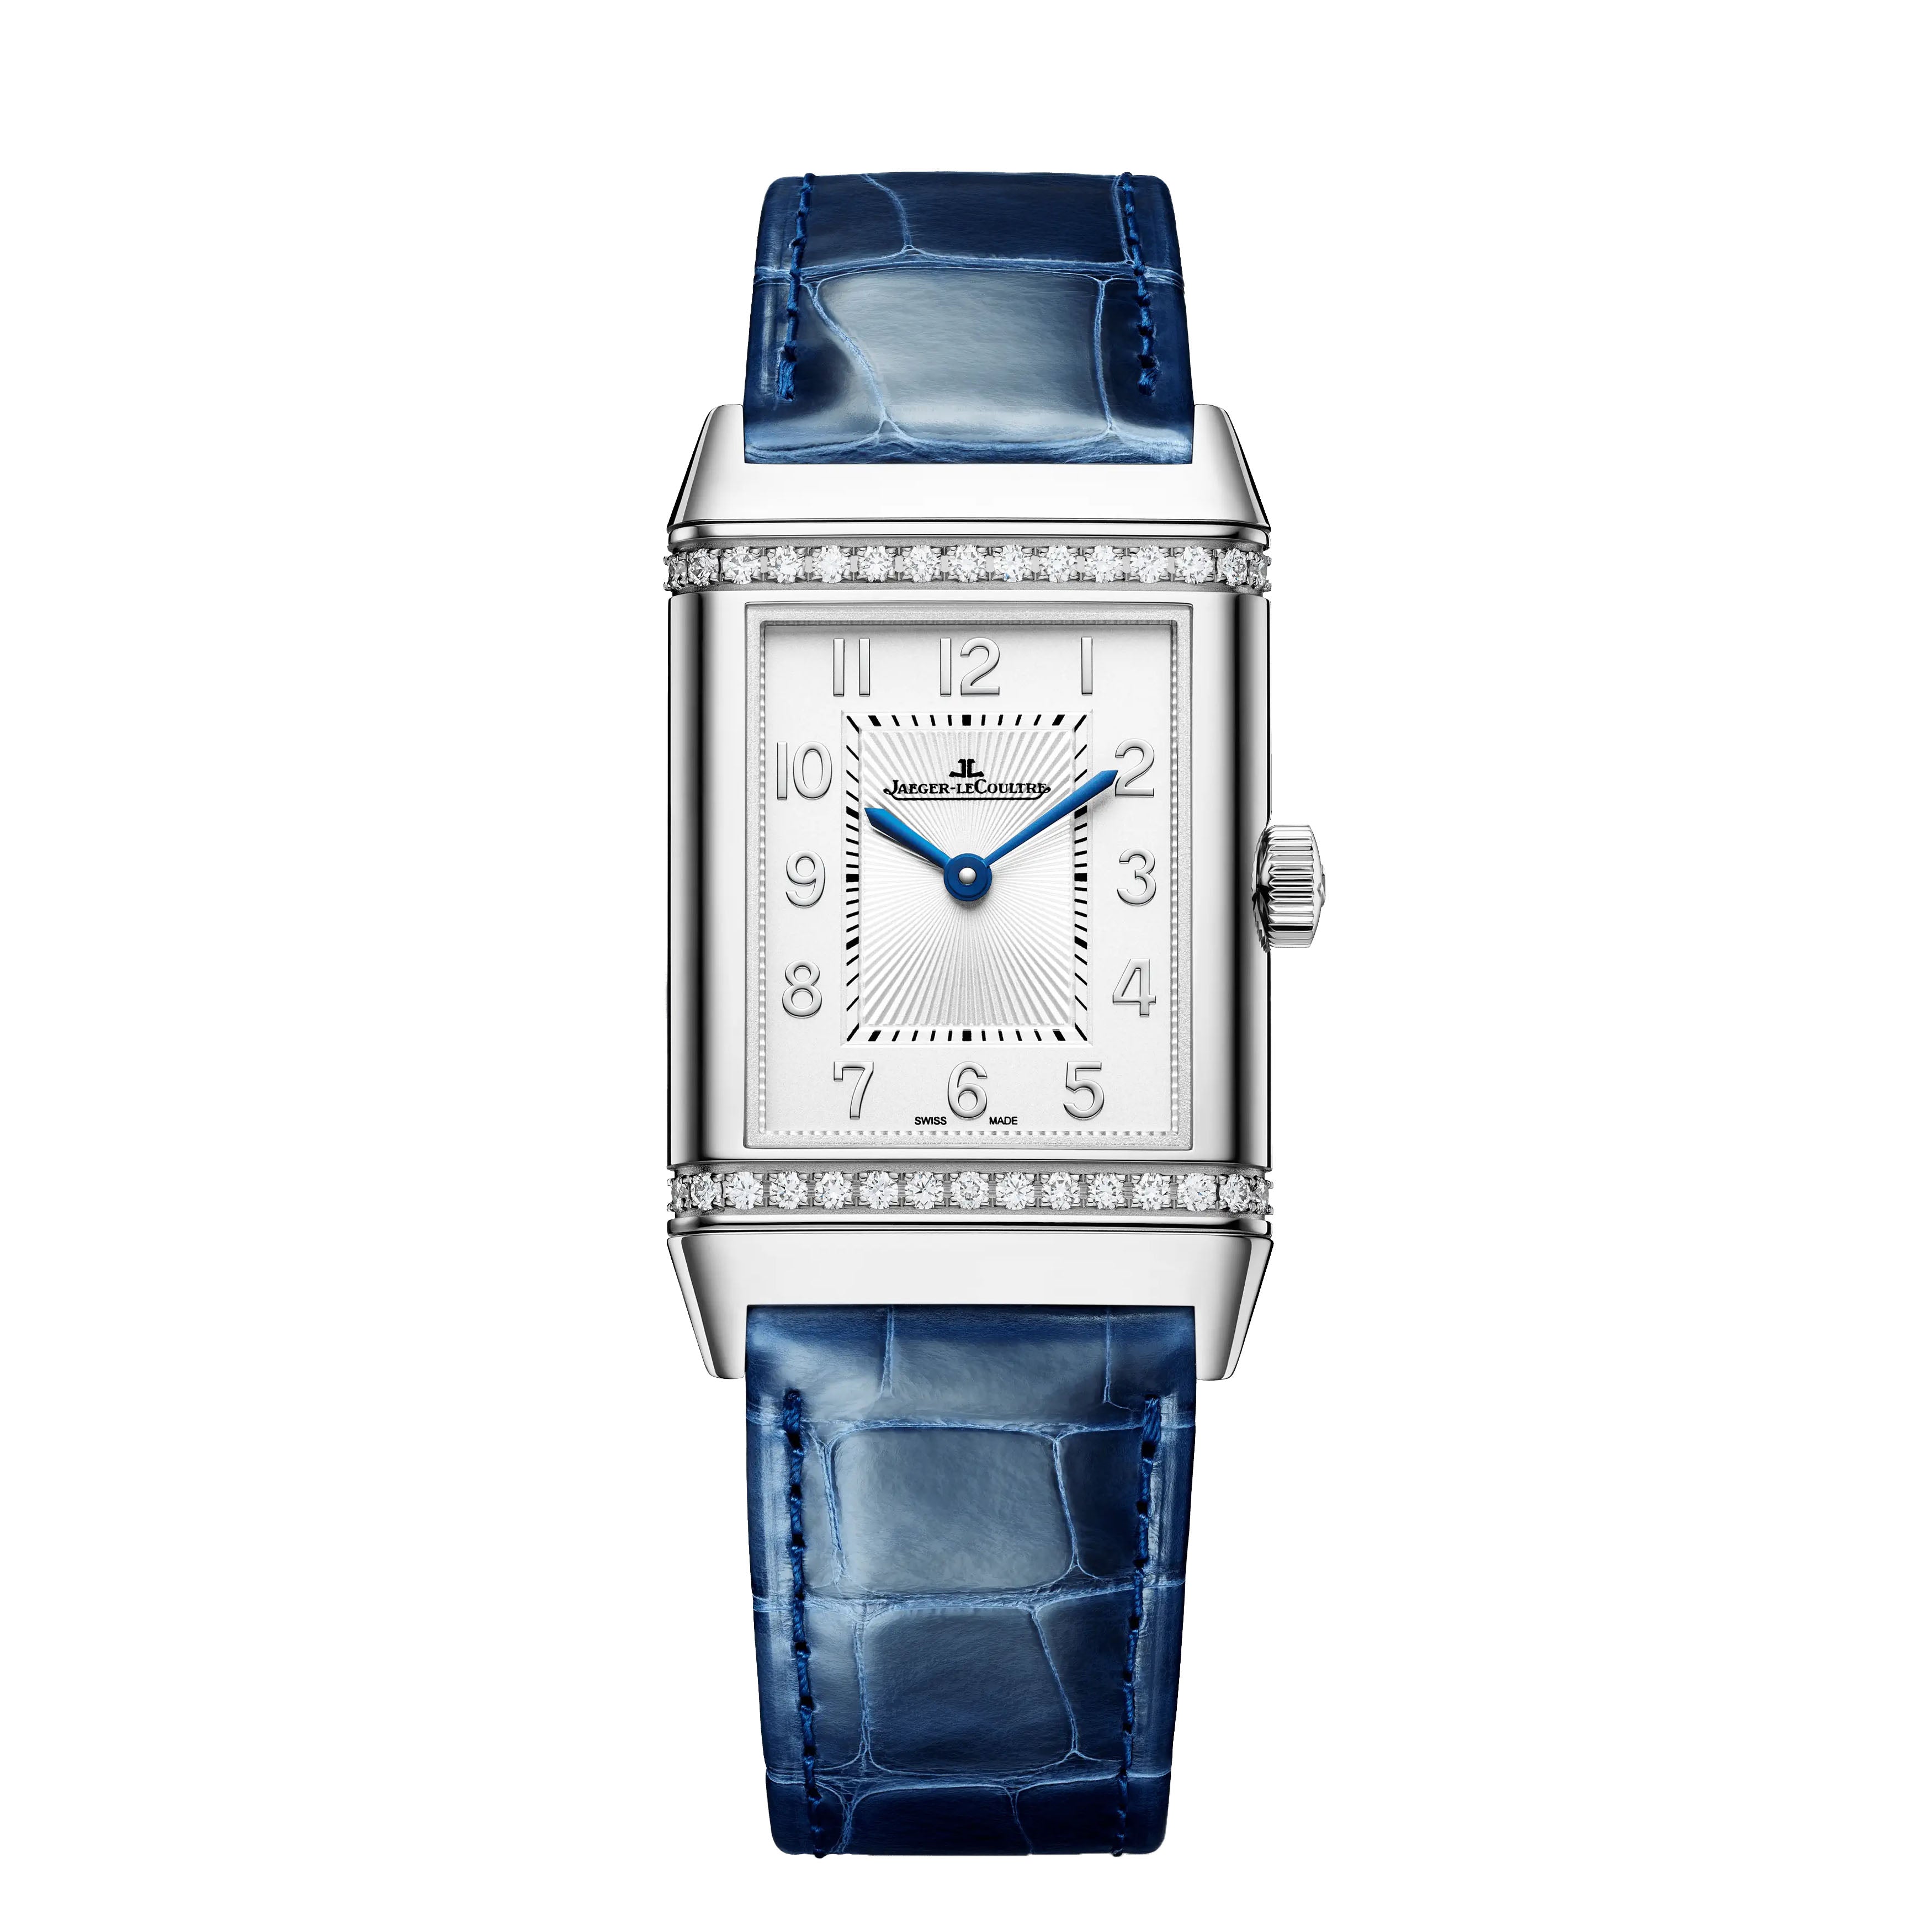 Jaeger-LeCoultre Reverso Classic Duetto Watch, 40mm Silver Dial, Q2578480